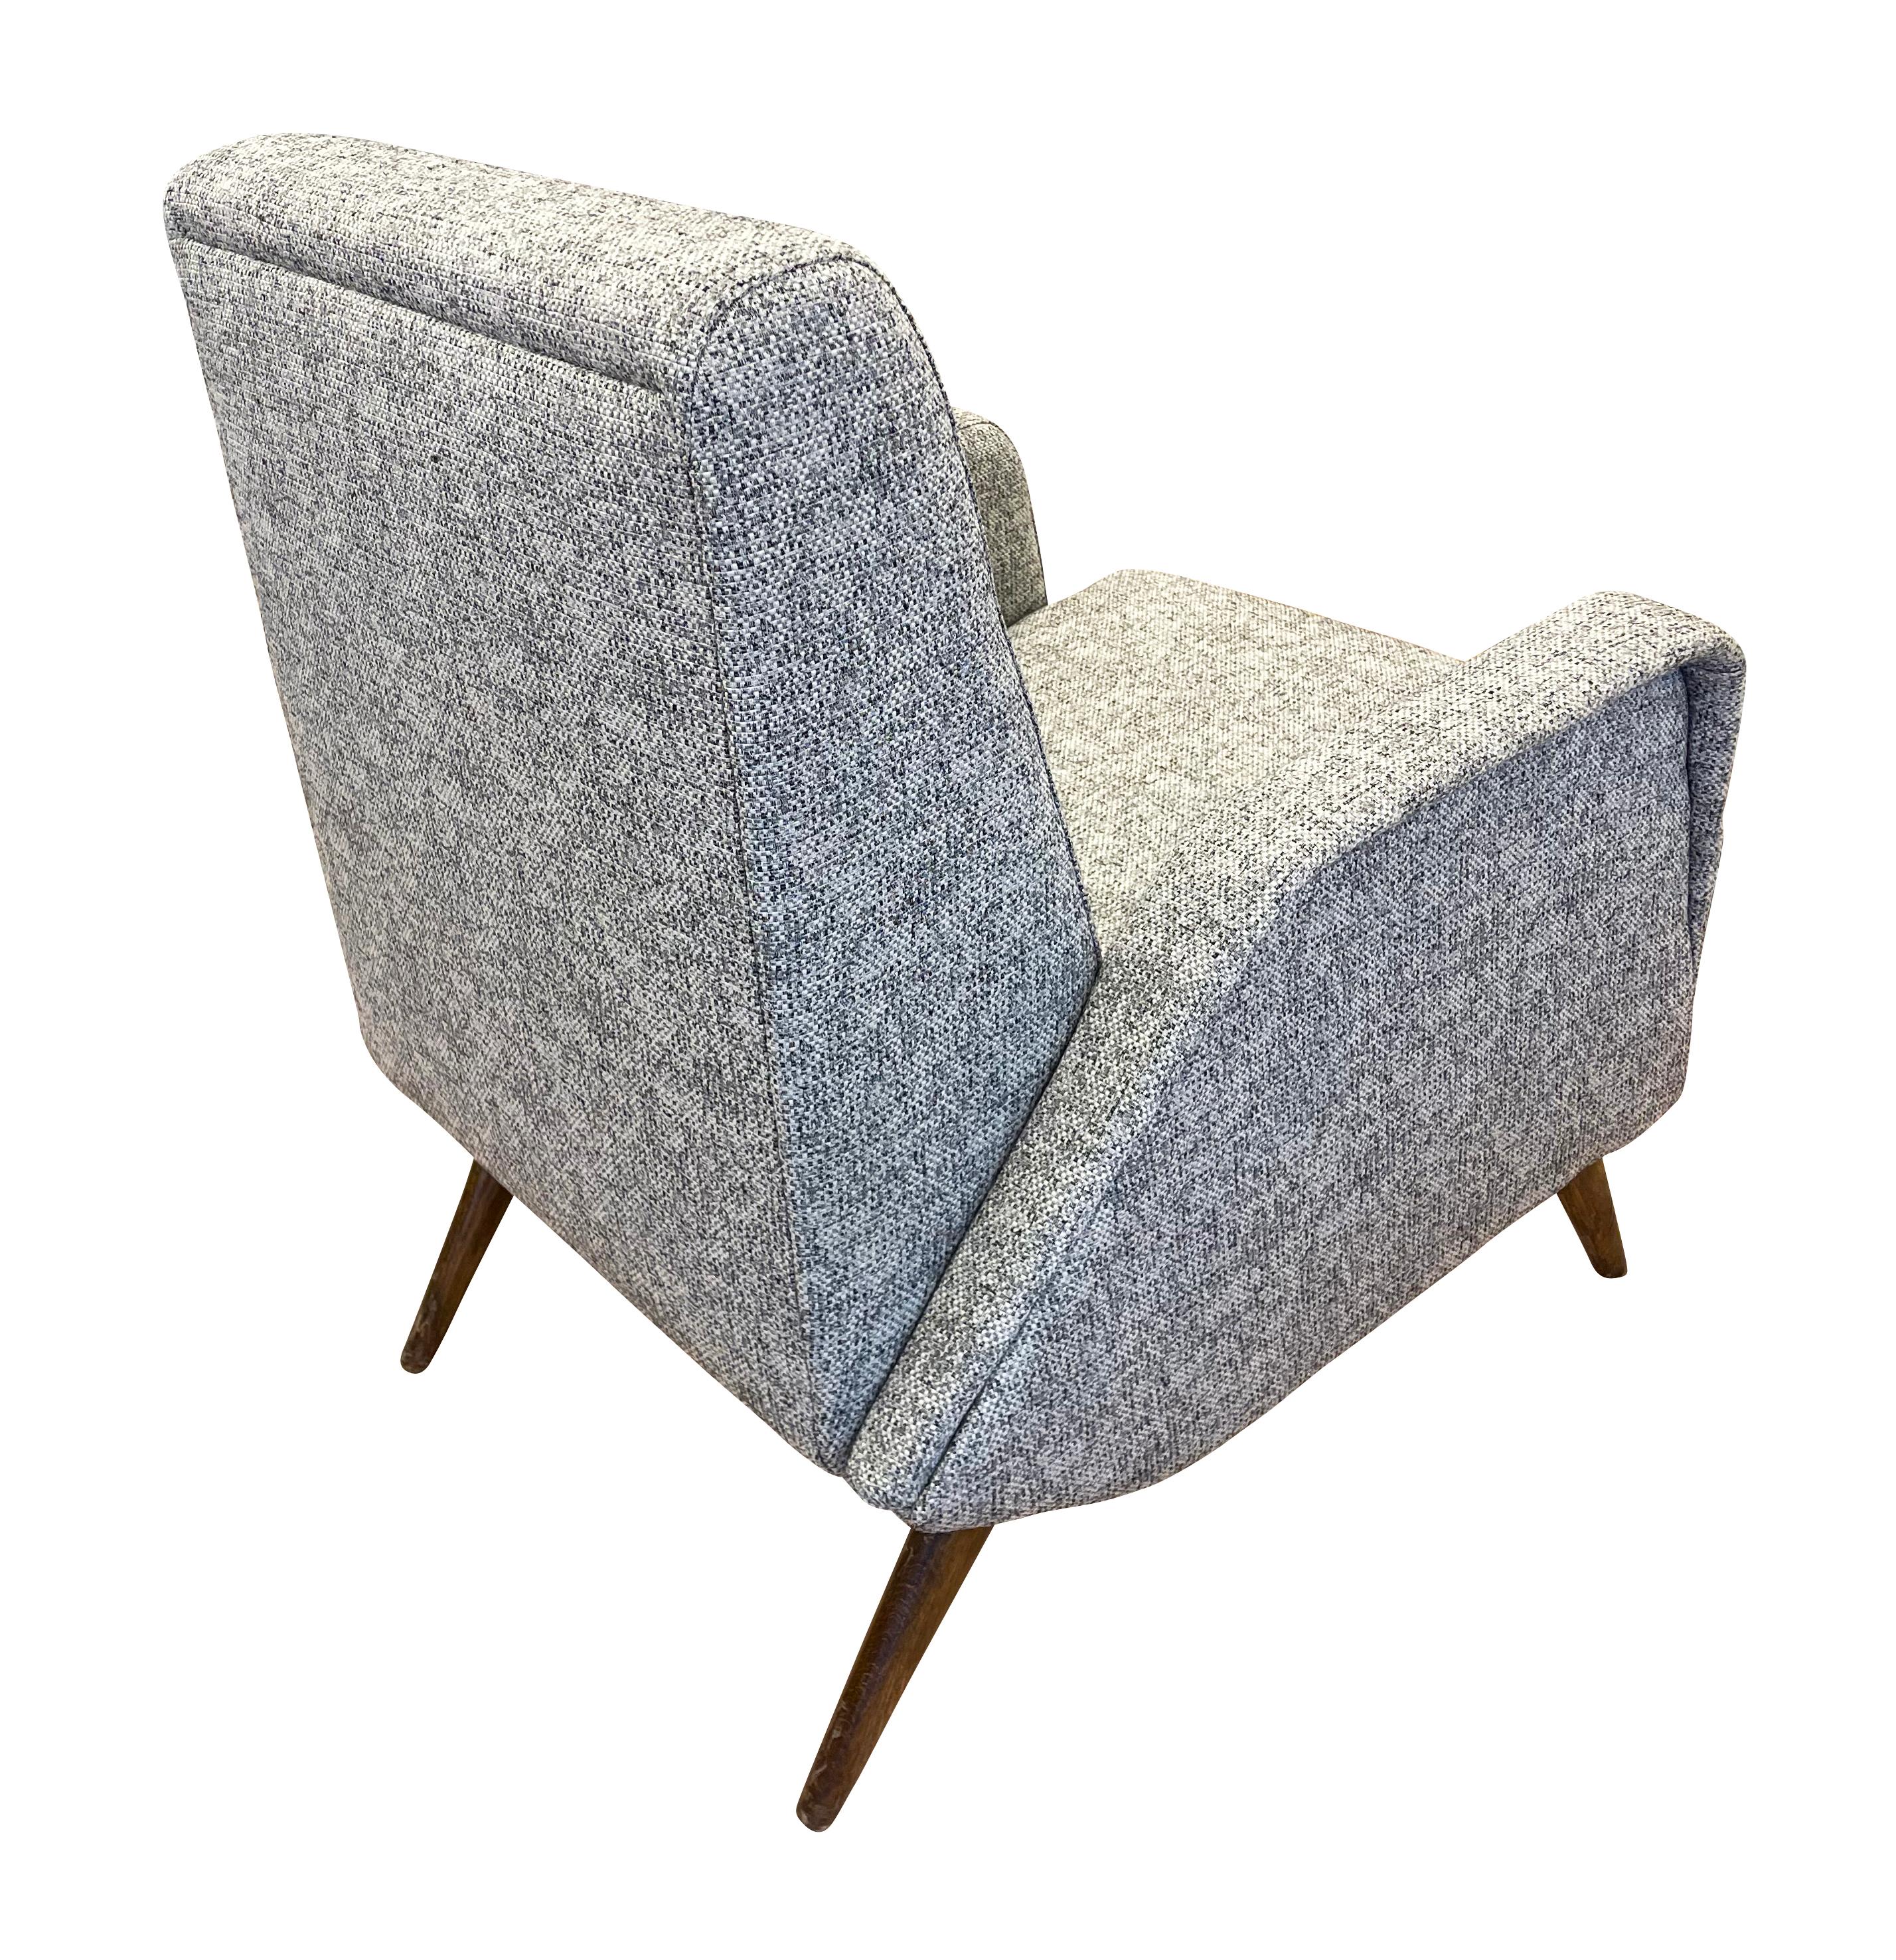 Italian mid-century armchair in the style of Gio Ponti. Wood legs. Recovered in a gray fabric.

Condition: Recovered, minor wear to the legs consistent with age and use

Measures: Width: 26.5”

Depth: 30”

Height: 32”

Seat height: